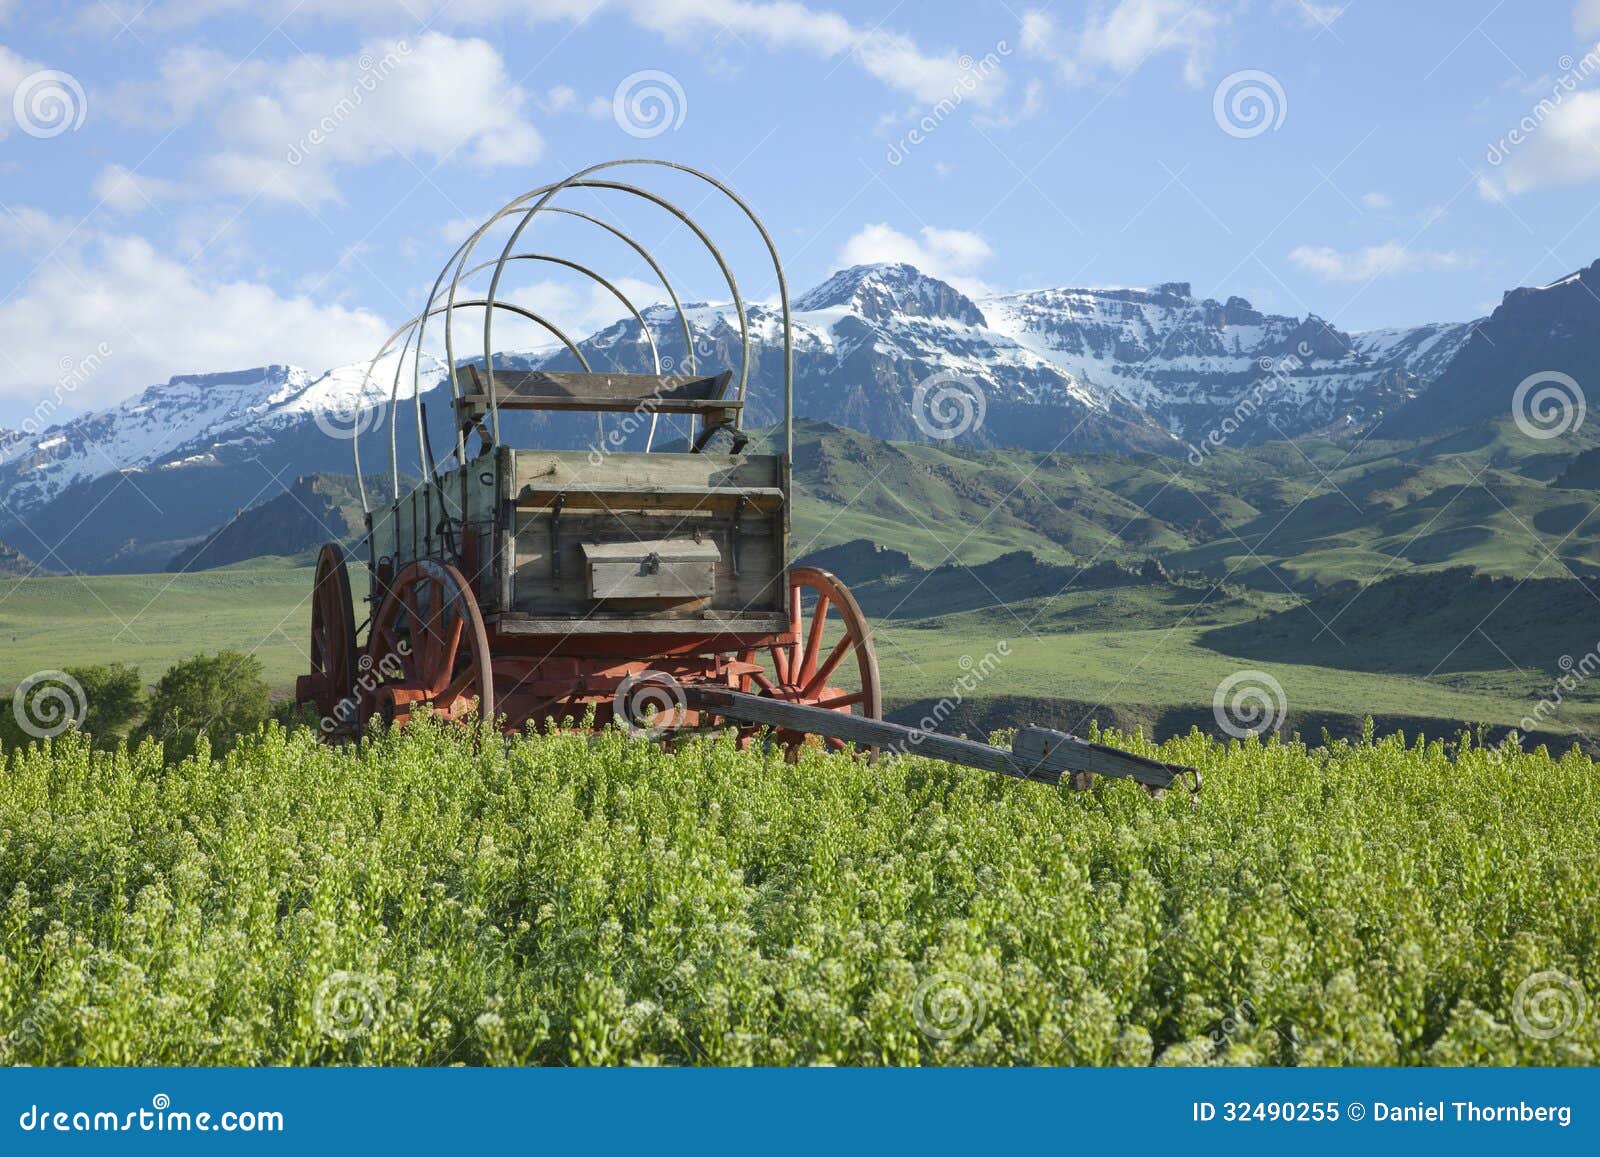 old covered wagon in the absaroka mountains of wyoming